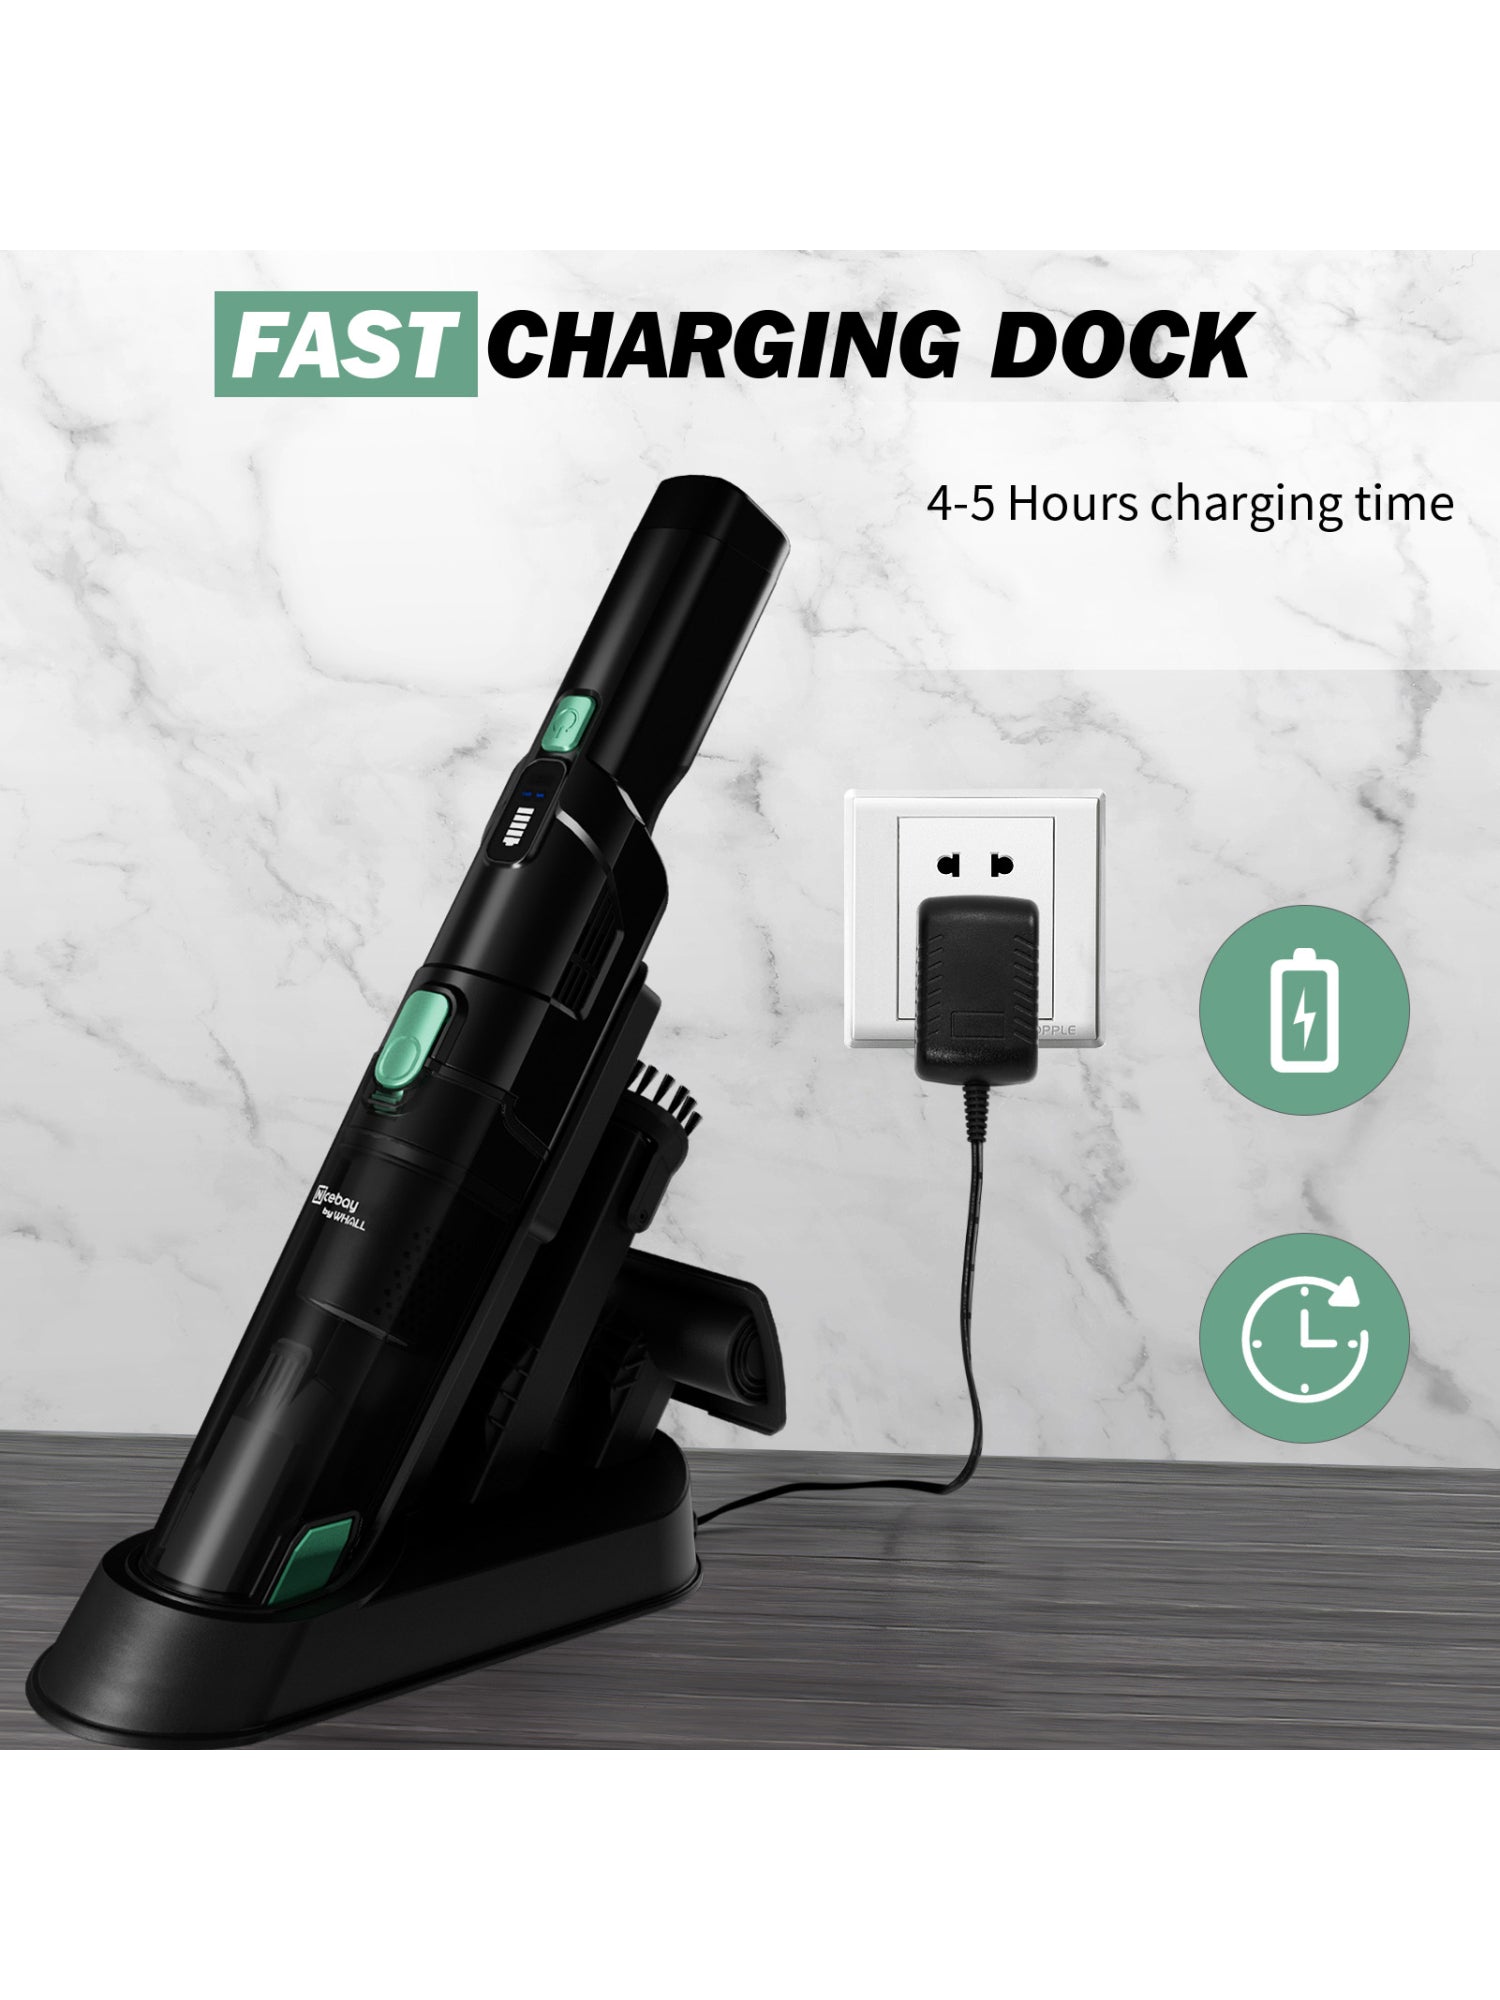 NICEBAY®EV-H061 Cordless Handheld Vacuum Cleaner 15KPA Powerful Suction with Fast Charging Dock, Portable Lightweight Cleaner, Rechargeable Hand Held Vacuum Cleaner for Home, Office, Pet and Car